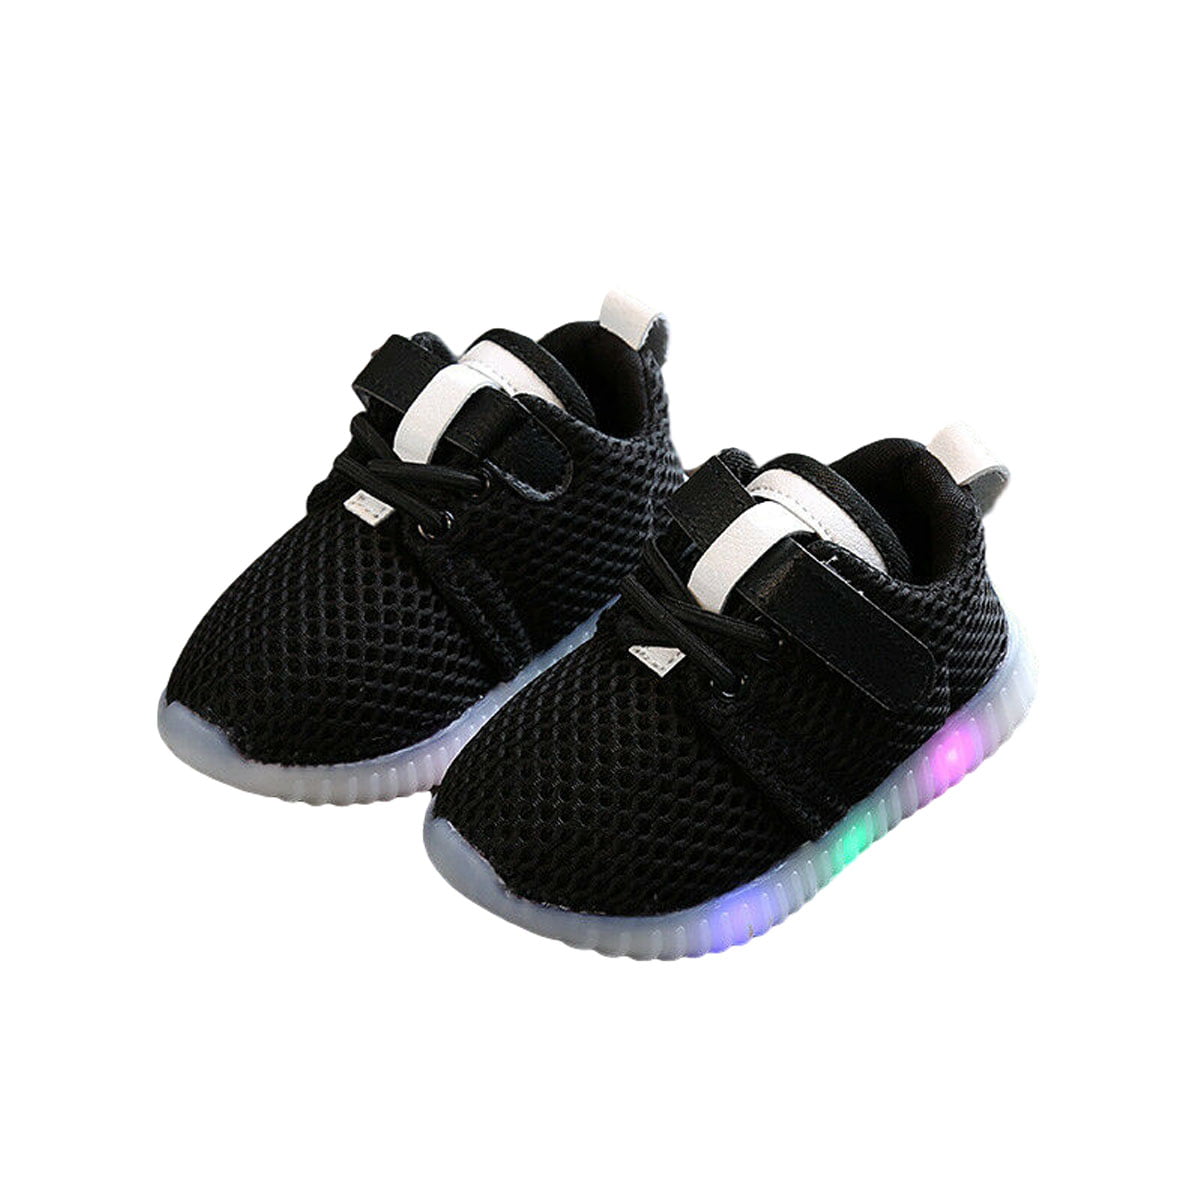 Infant Shoes for Little Kids Janly Clearance Sale Baby Shoes Children Newborn Girls Boys Solid Mesh LED Light Luminous Sport Run Sneakers Shoes